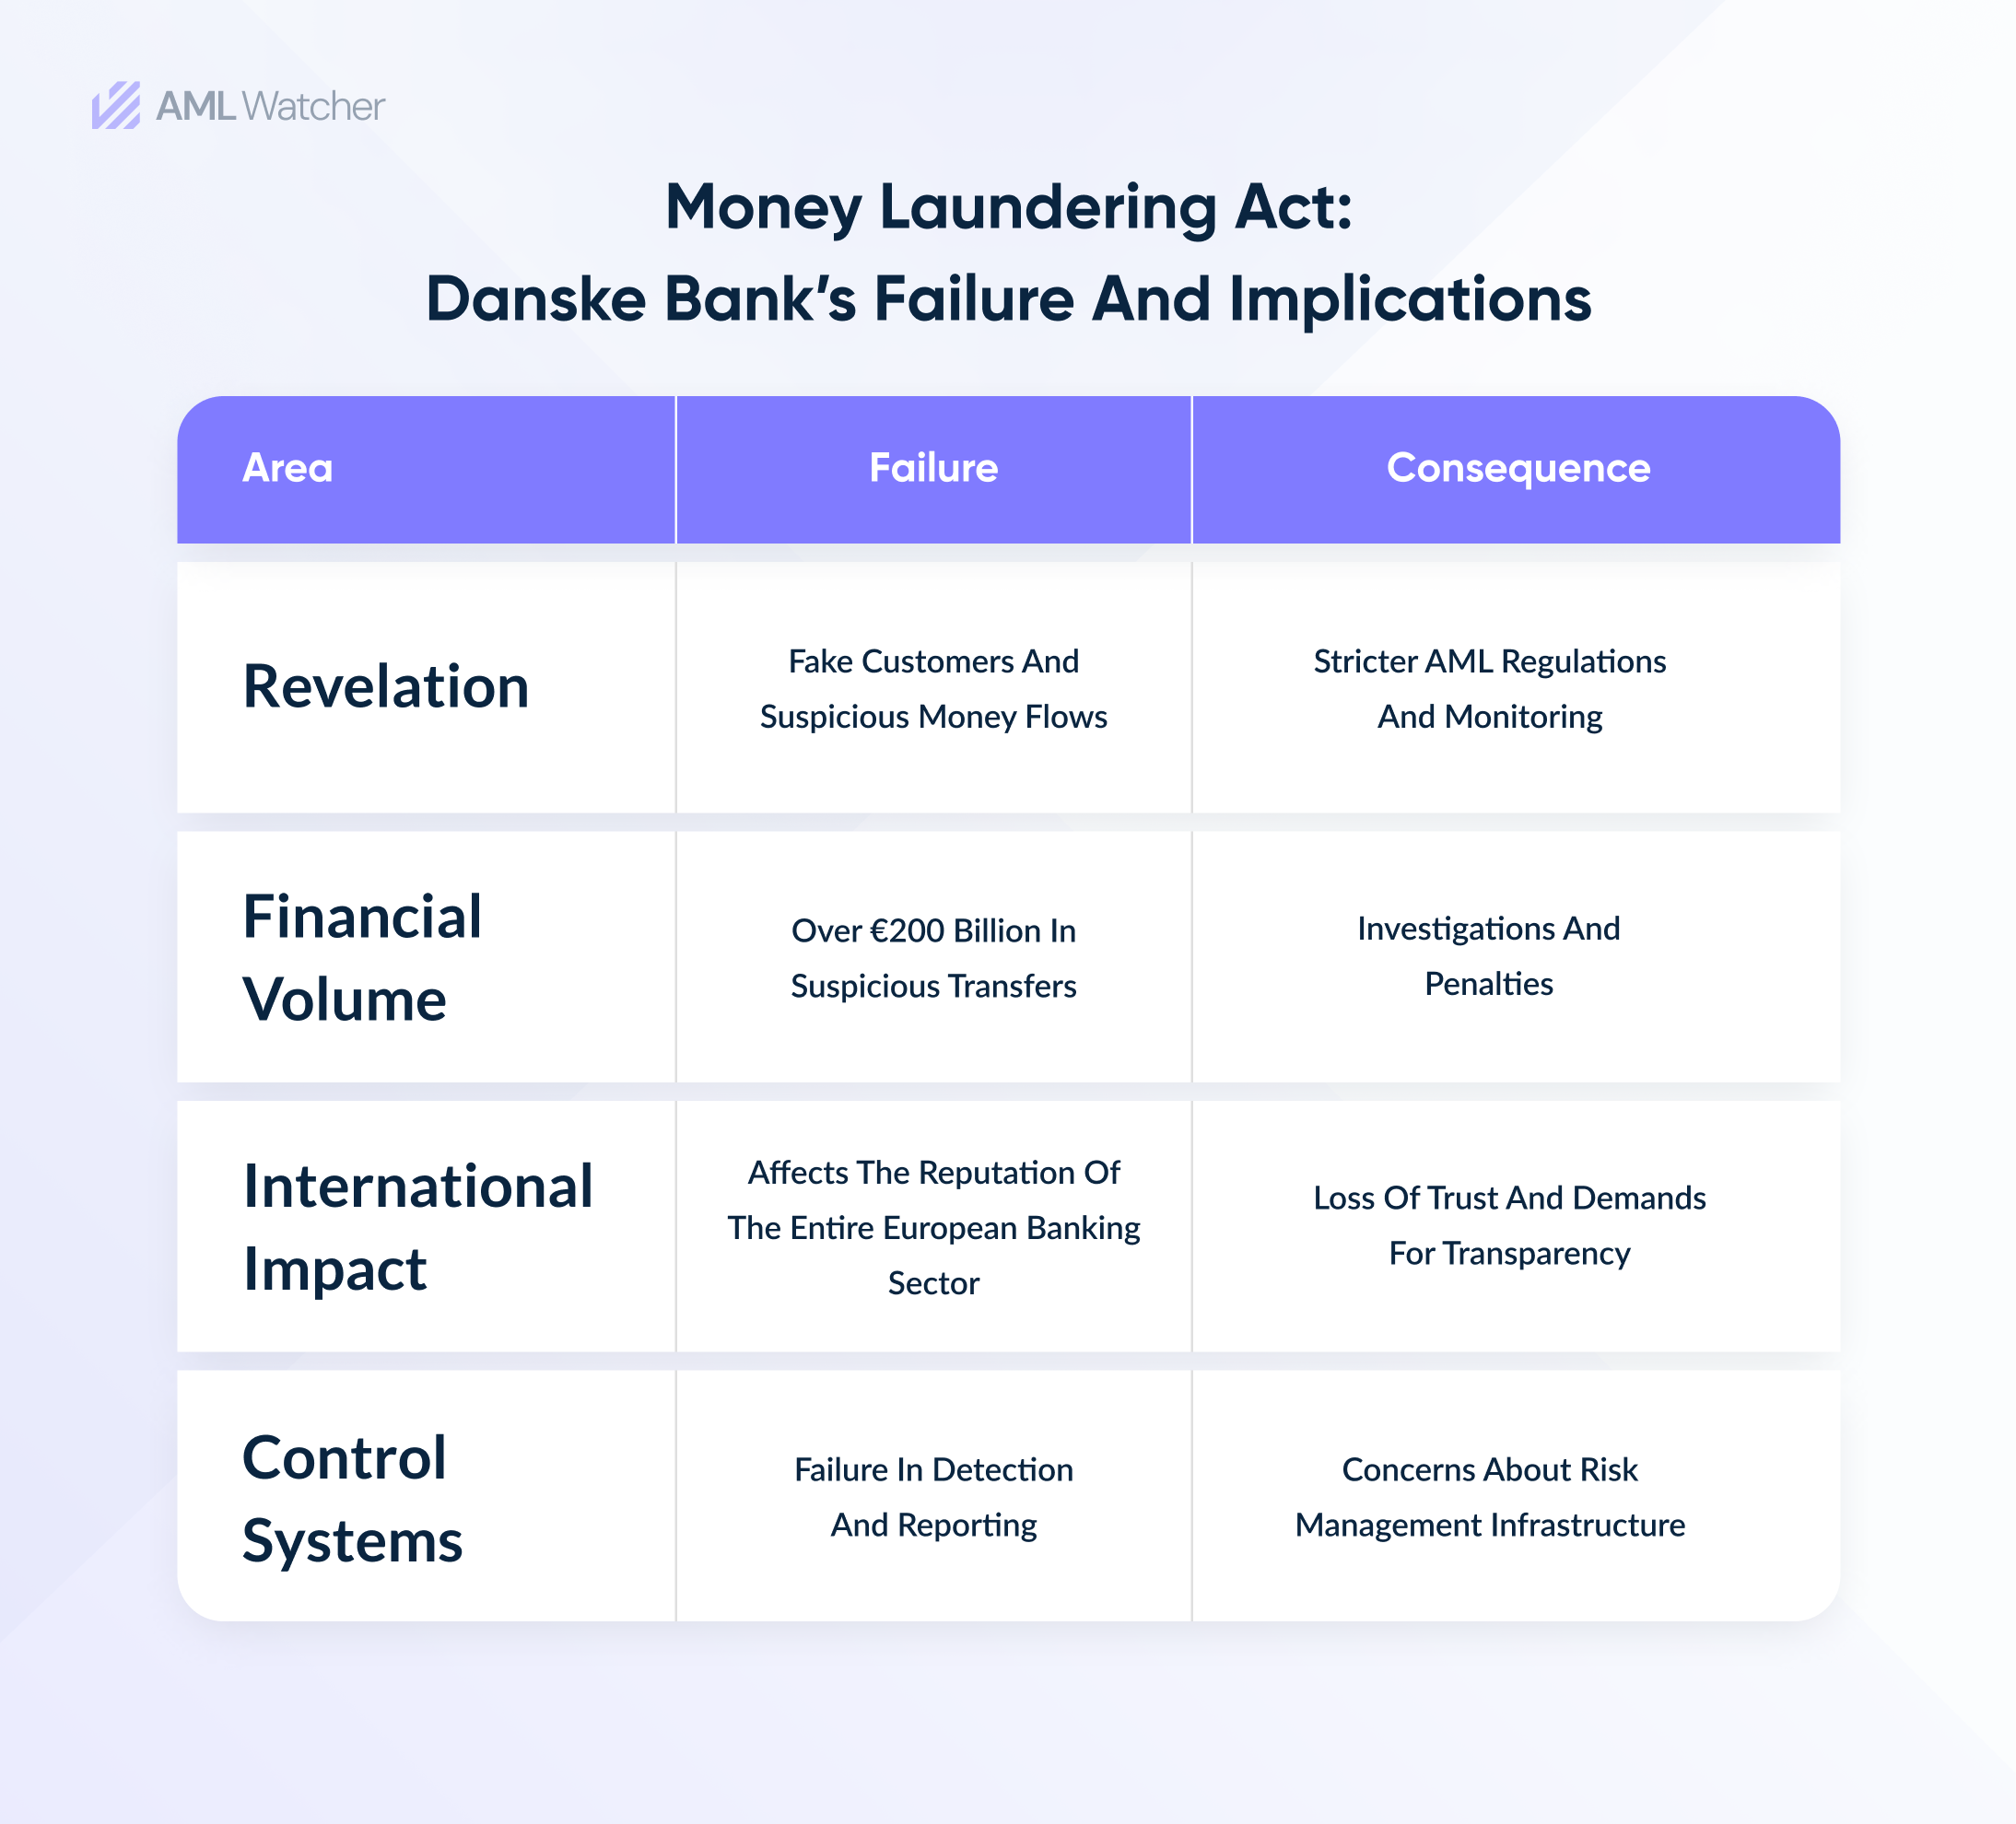 This image shows the use case of Danske Bank’s failure and consequences to identify money laundering acts.